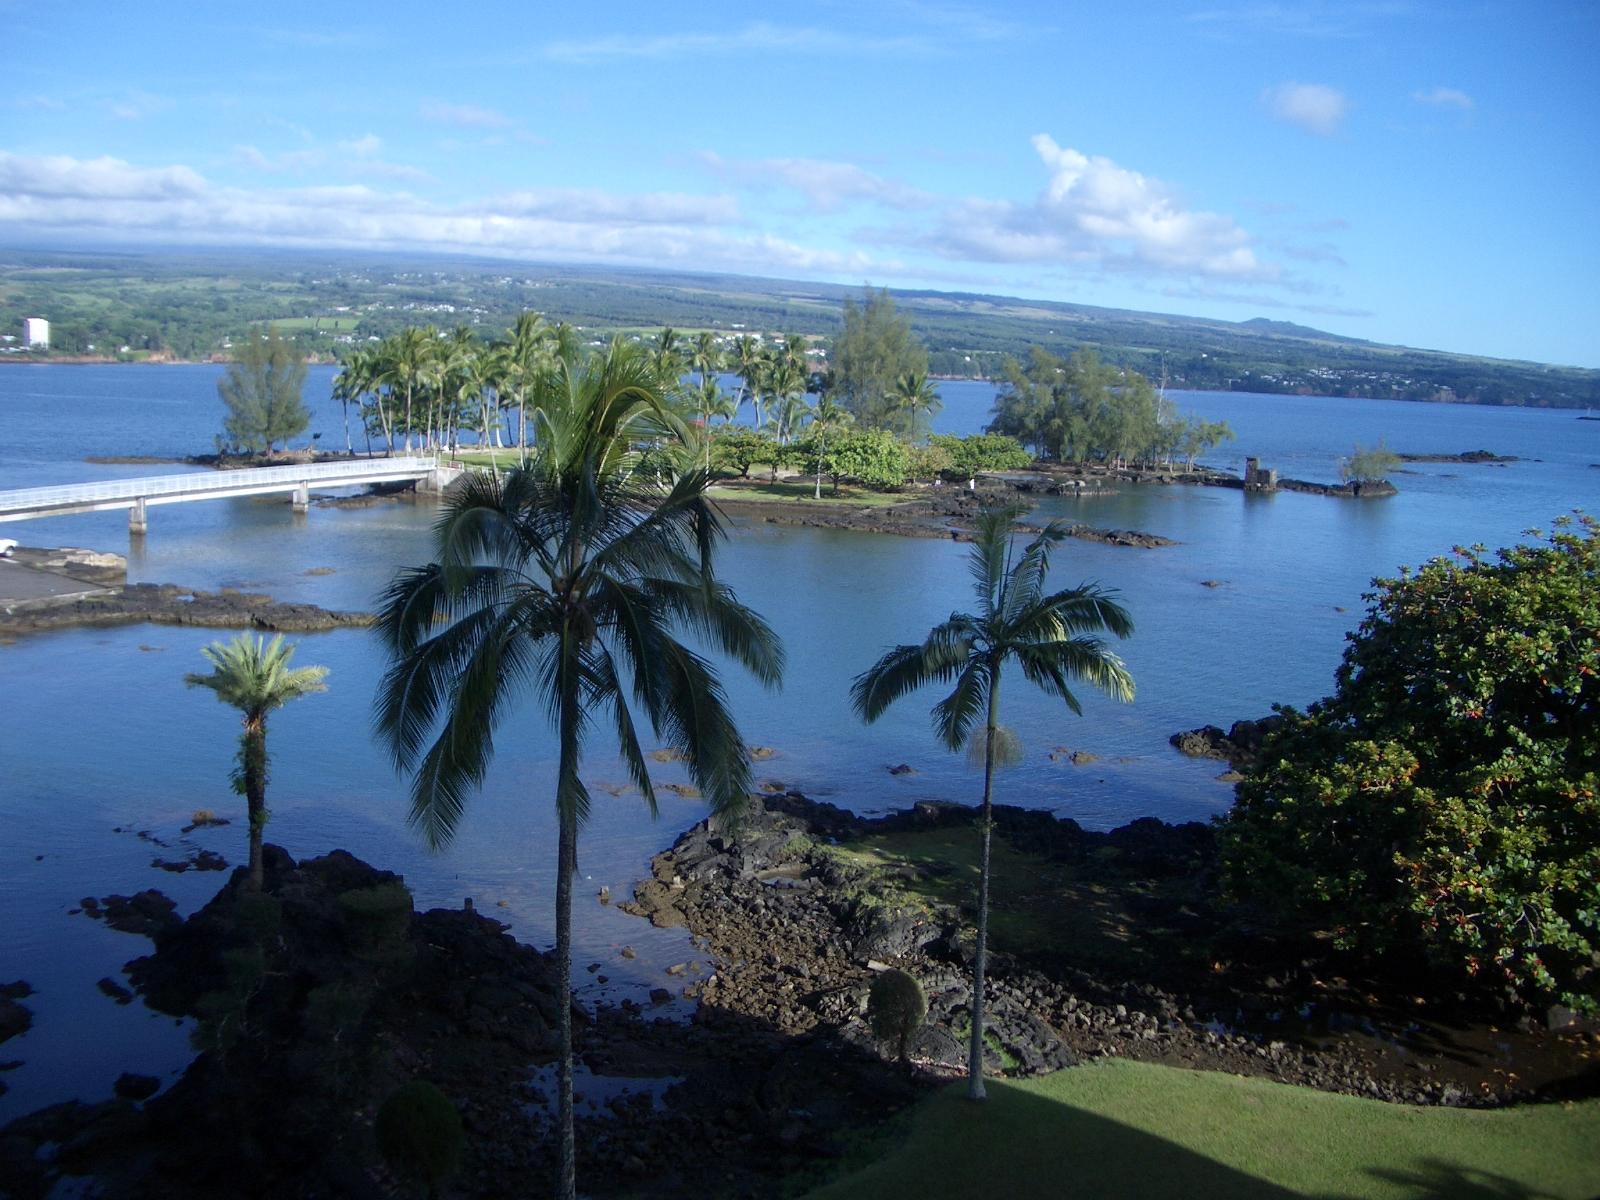 http://www.classicalarchives.com/prs/astro/Hawaii/22-Hilo_Bay.jpg